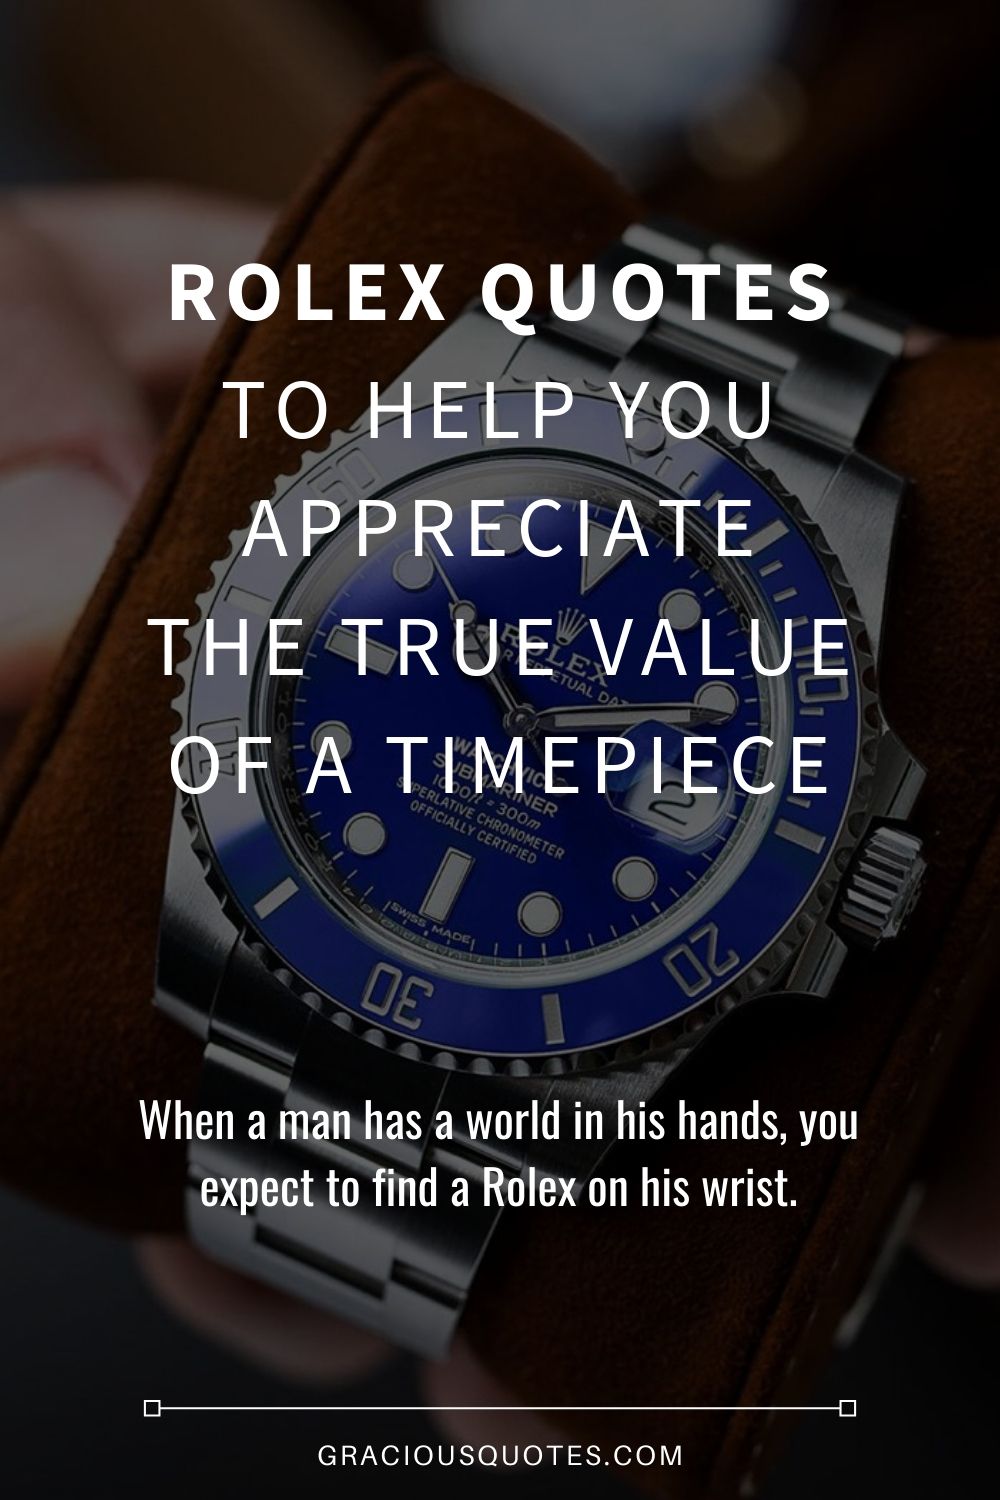 42 Watch Quotes (Famous Sayings About Watches, Clocks & Time) - WatchRanker-saigonsouth.com.vn